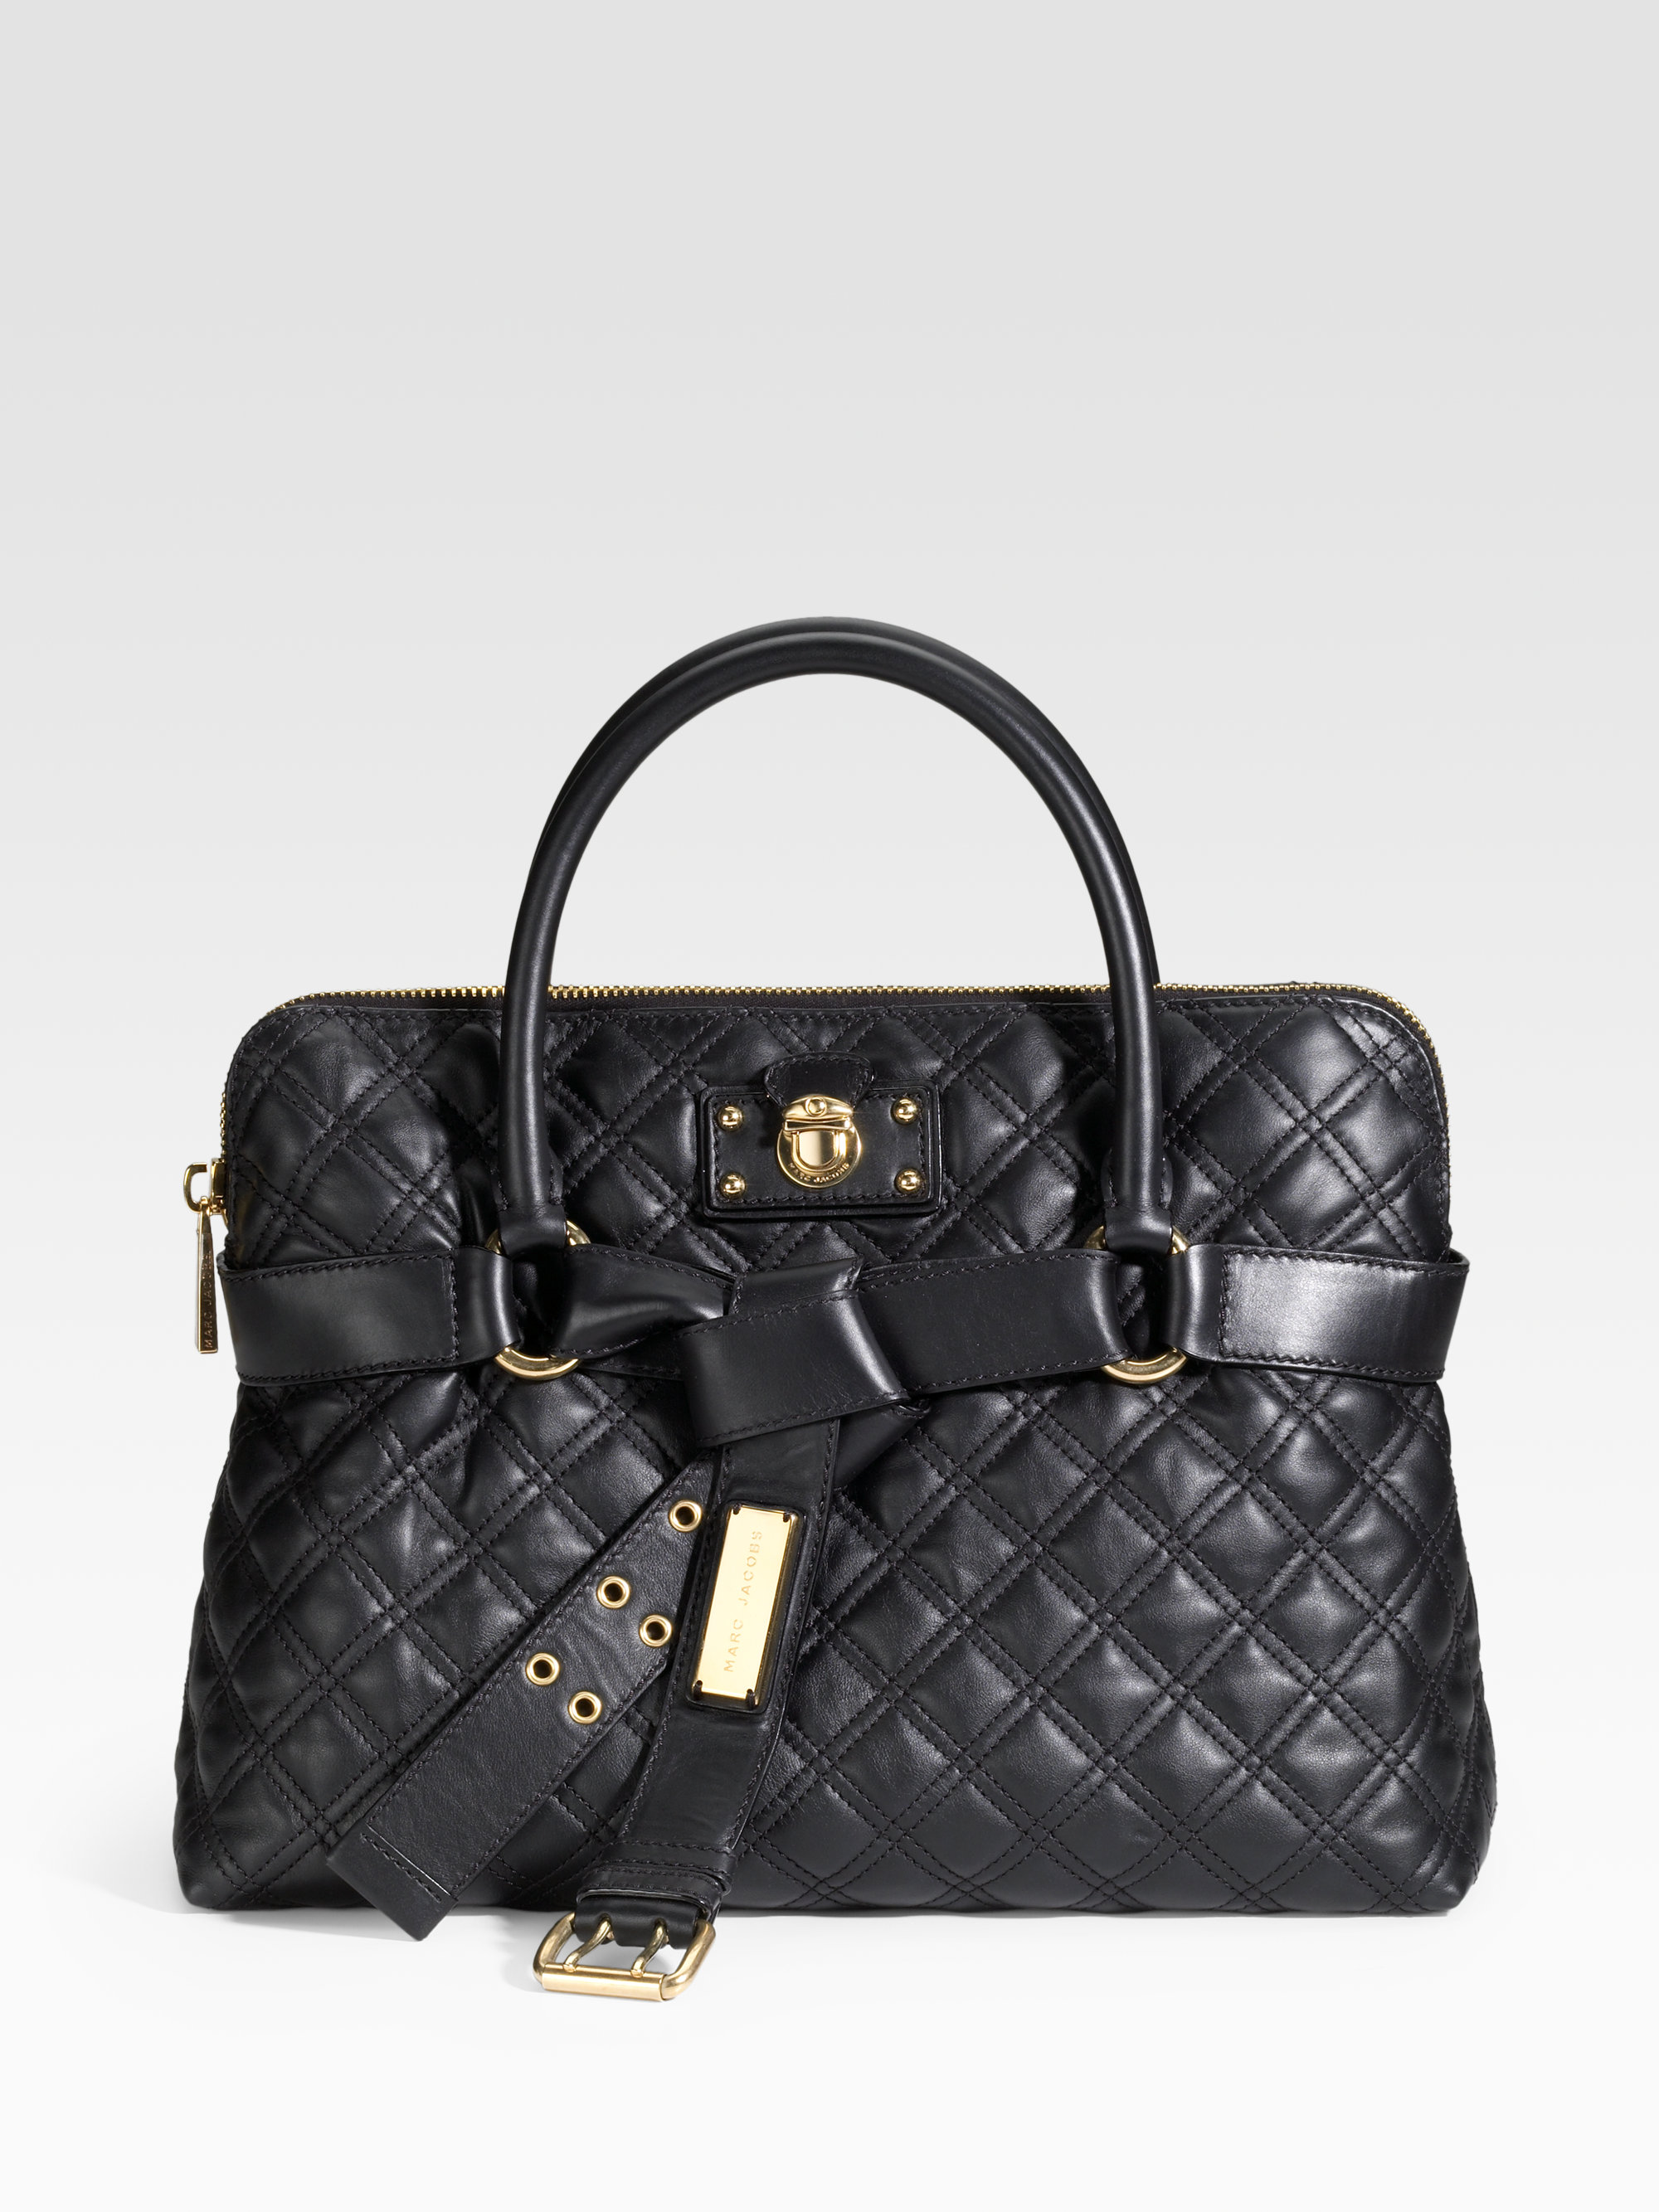 Marc Jacobs Bruna Classic Quilted Bag in Black - Lyst